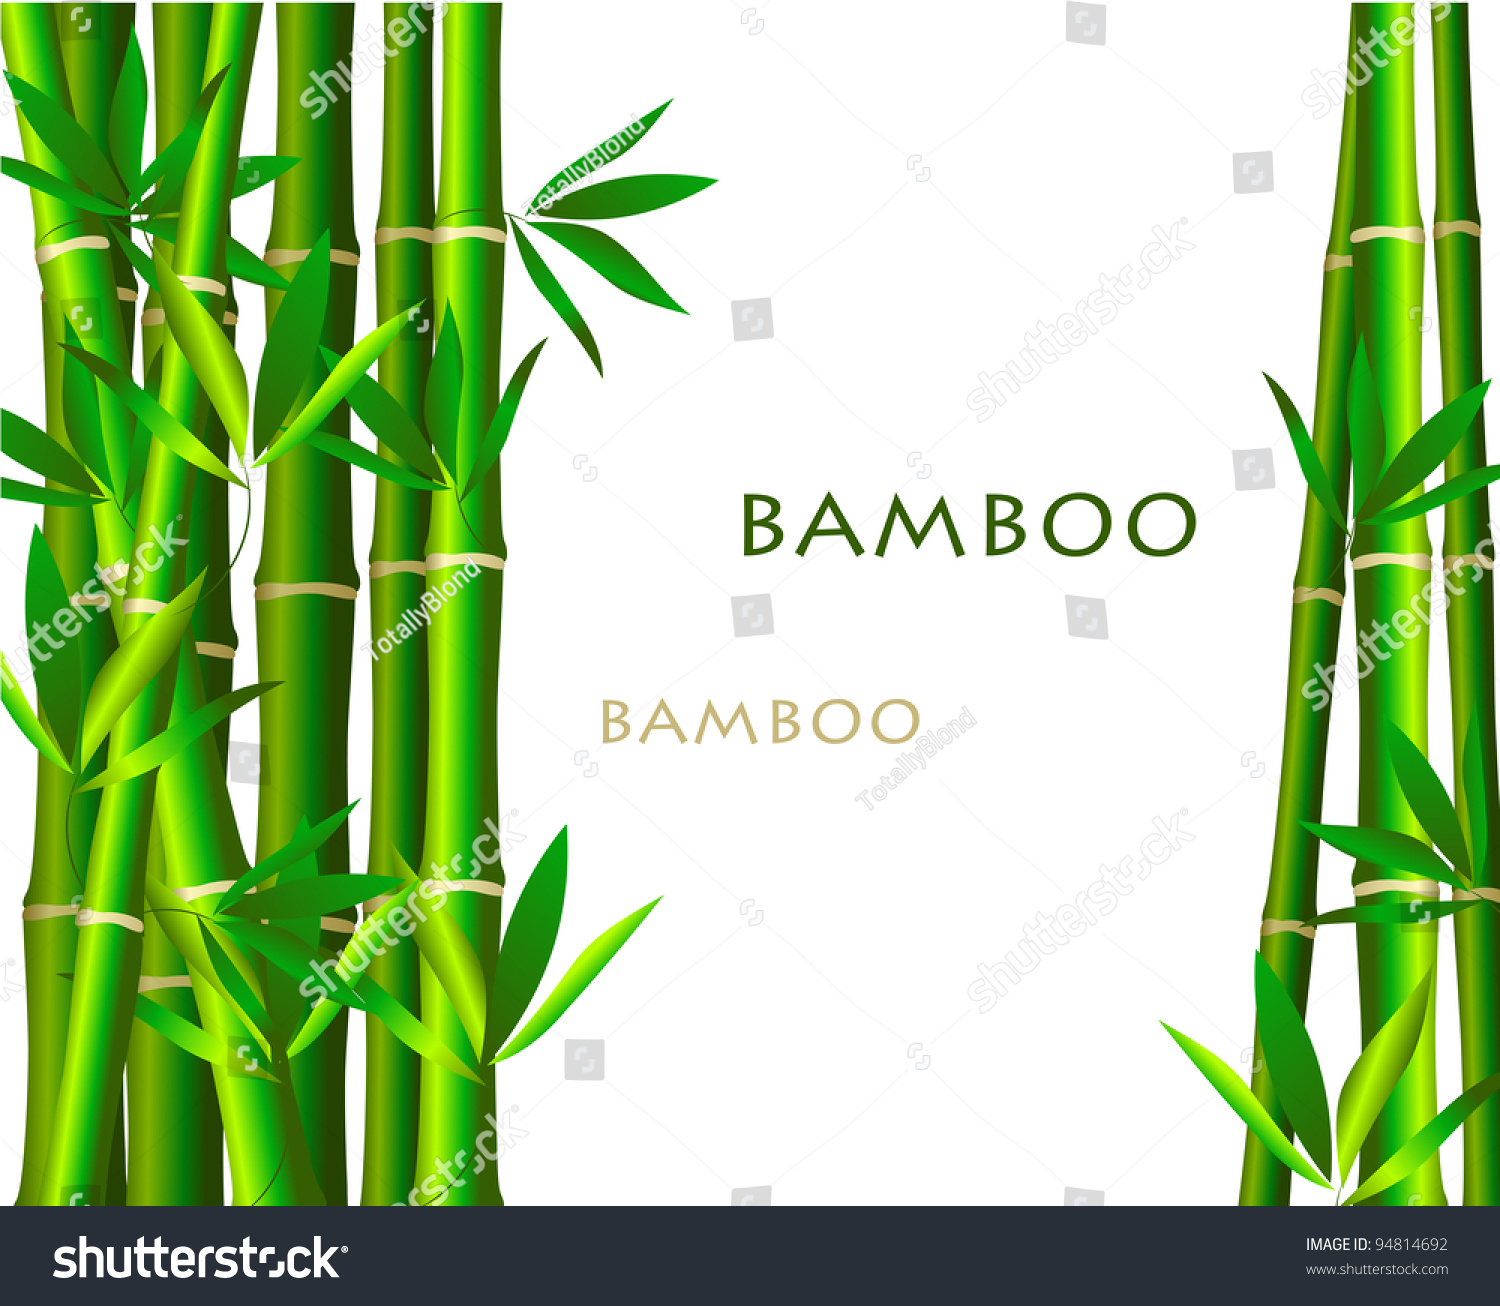 Bamboo Isolated On White Background Stock Vector Illustration 94814692 ...